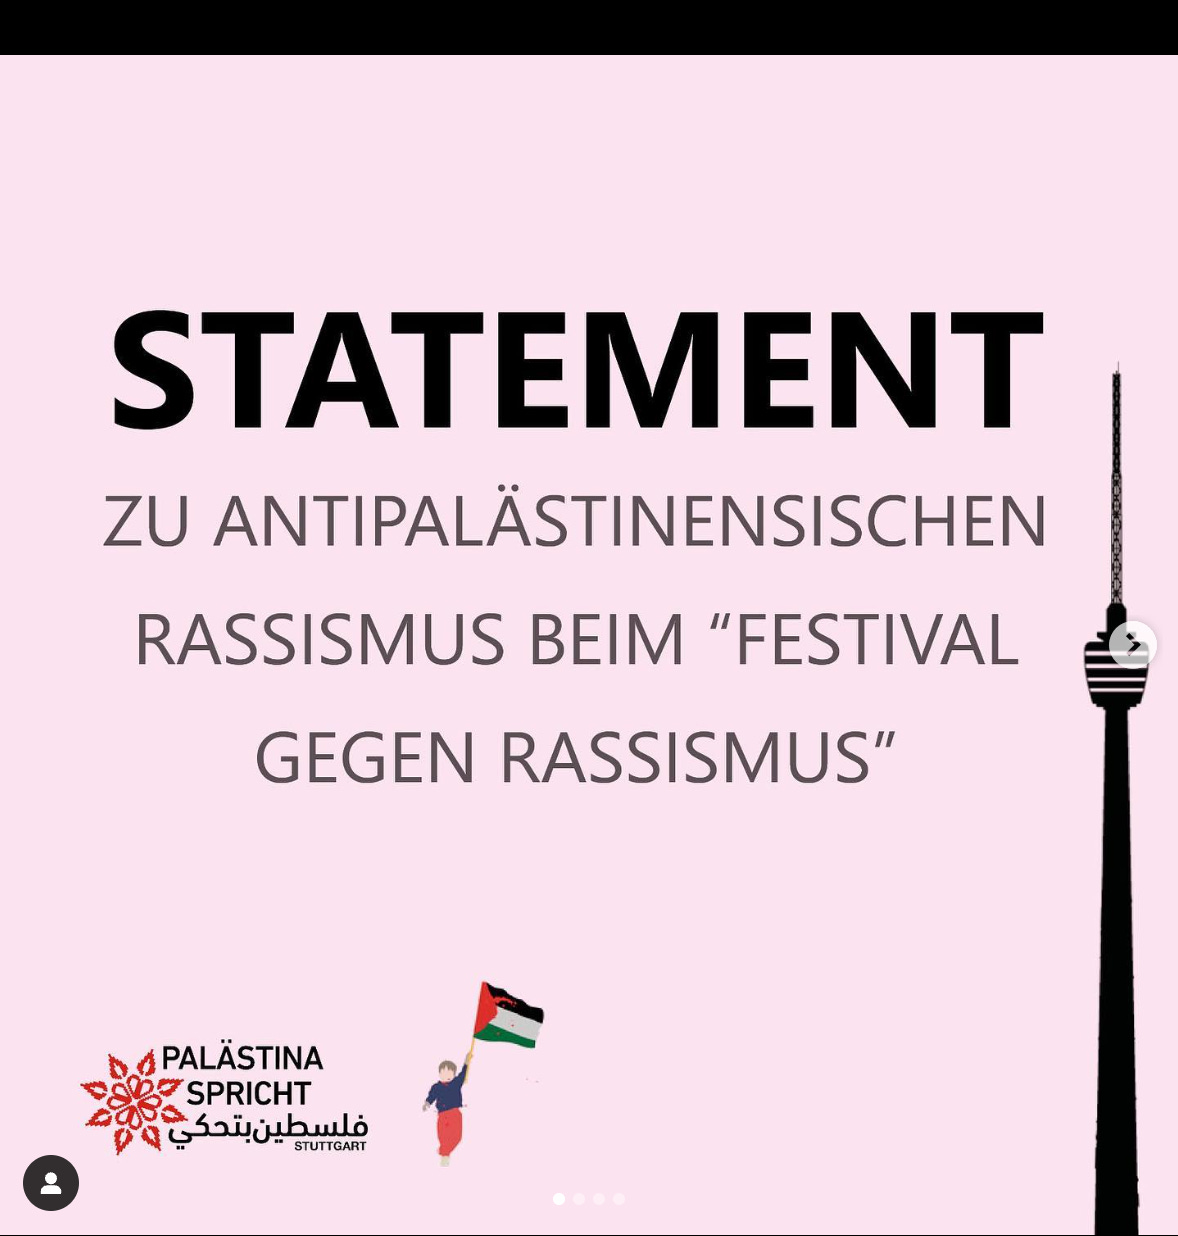 A pink square with black text reading "Statement zu antipalästinensischen Rassismus beim 'Festival gegen Rassismus'". A black graphic-style image of the TV Tower in Berlin is on the right.